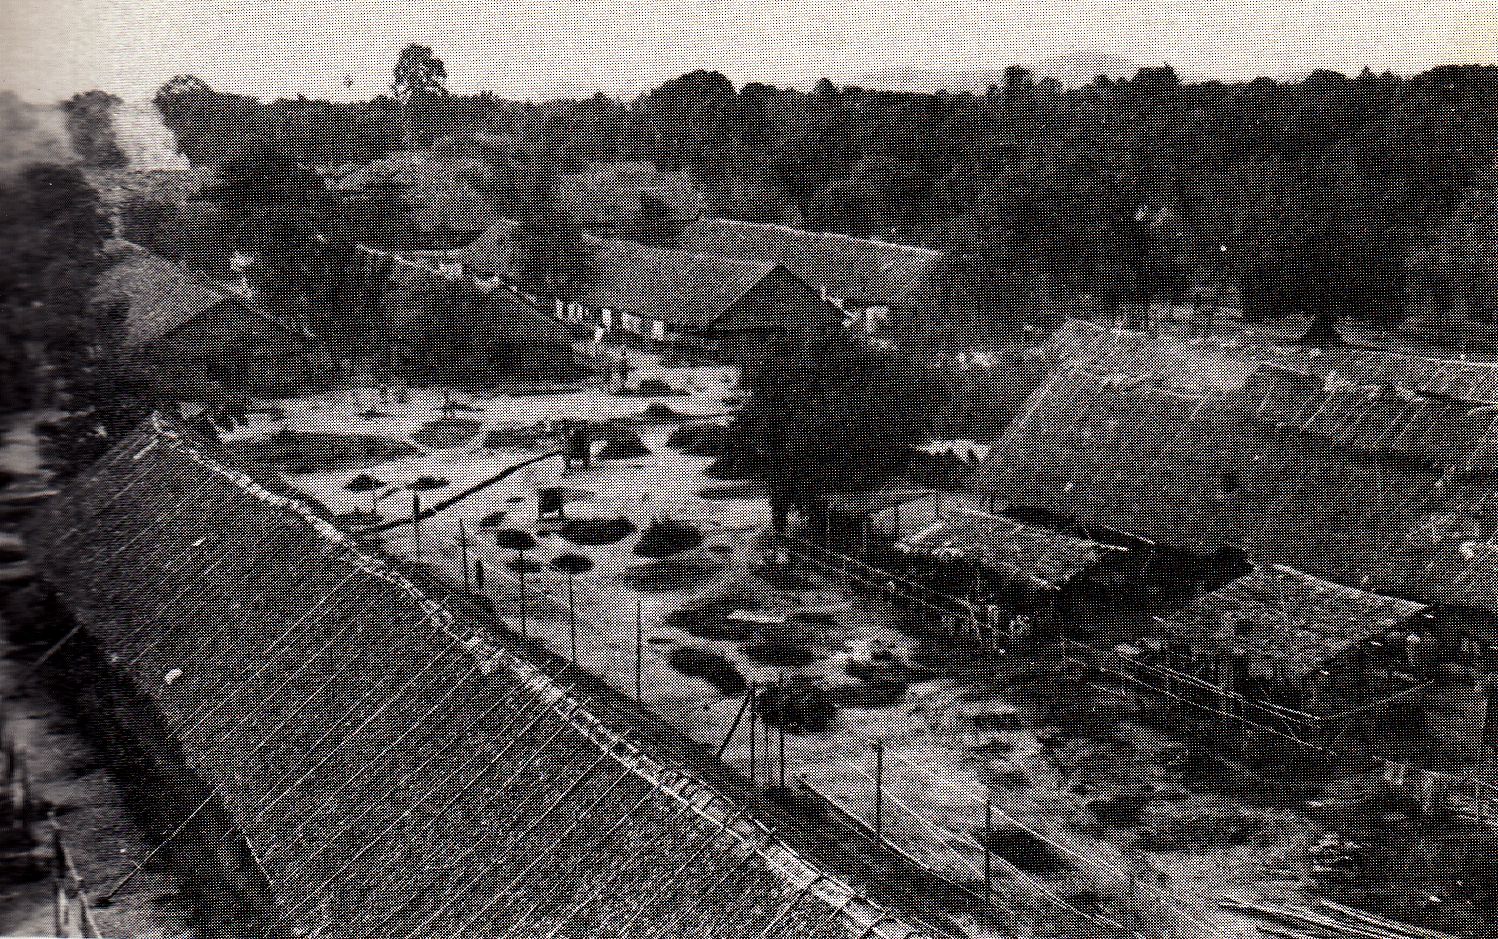 A barracks style camp in Thailand (Imperial War Museum)